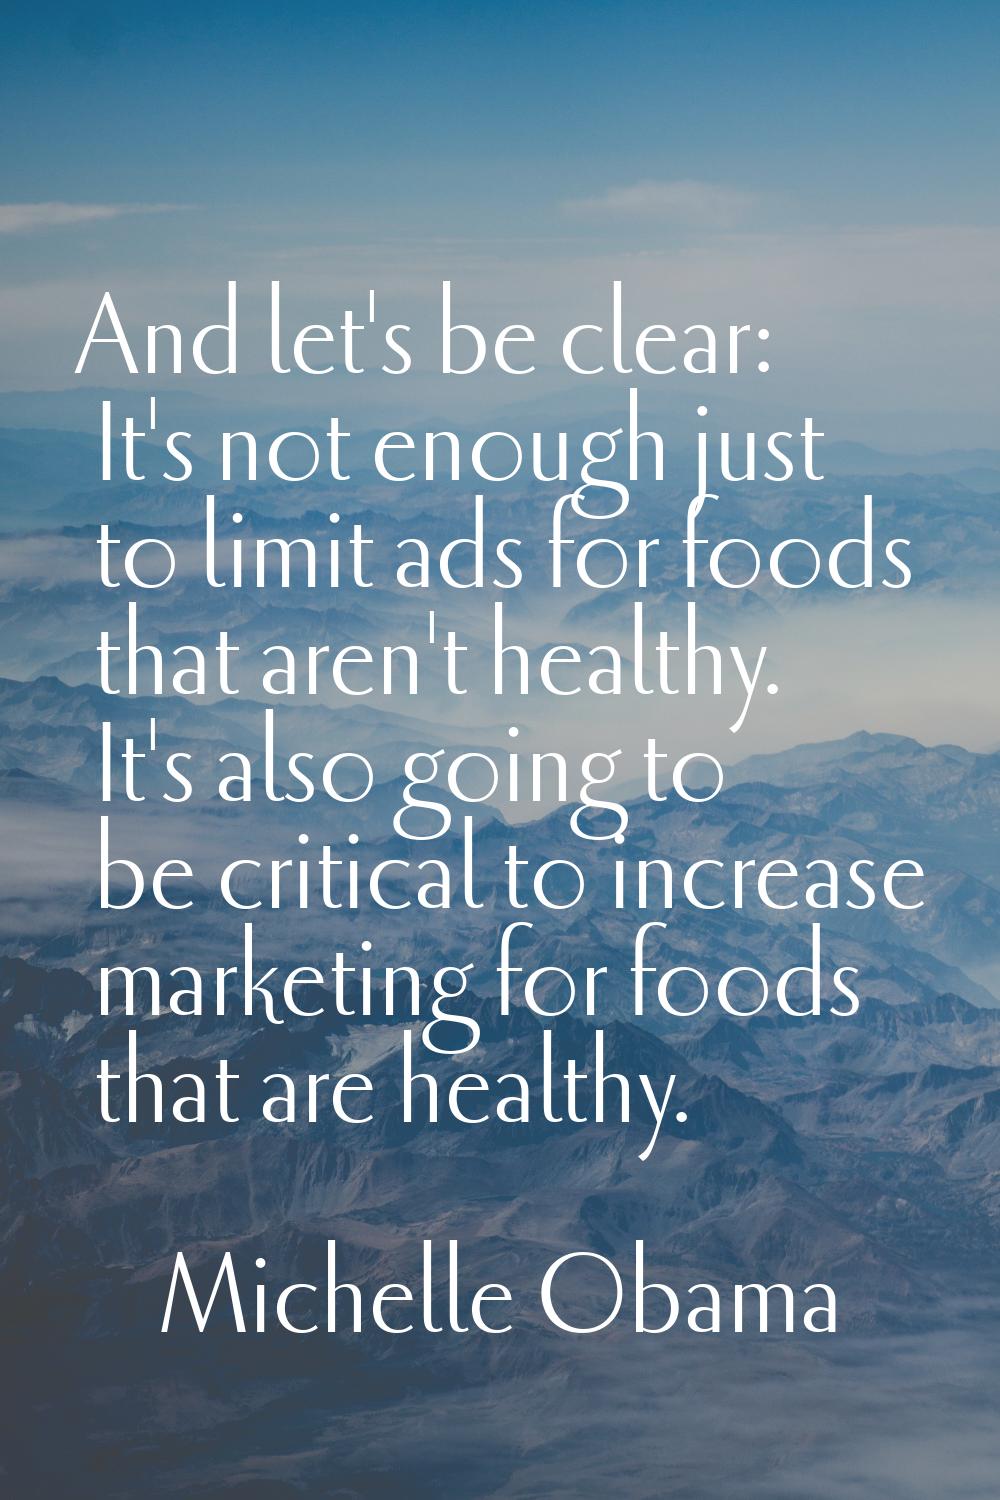 And let's be clear: It's not enough just to limit ads for foods that aren't healthy. It's also goin